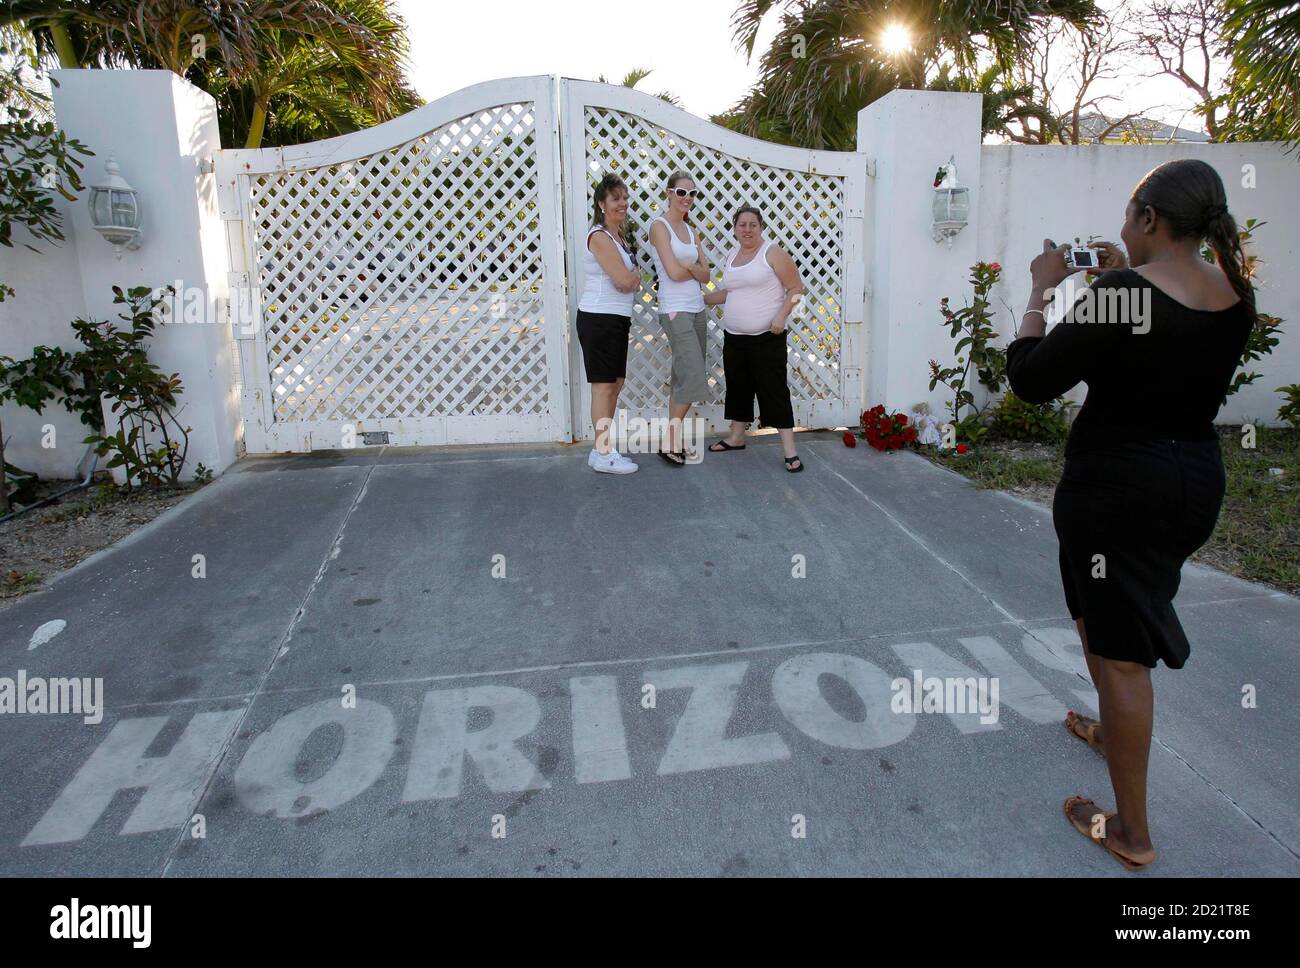 Deborah Palmer of Nassau (R) takes a photo of vacationers (L-R, rear)  Debbie Phillips, Justina Tisdell and Sandra Coss of Orlando as they pose  outside the gates to "Horizons" in Nassau, Bahamas,